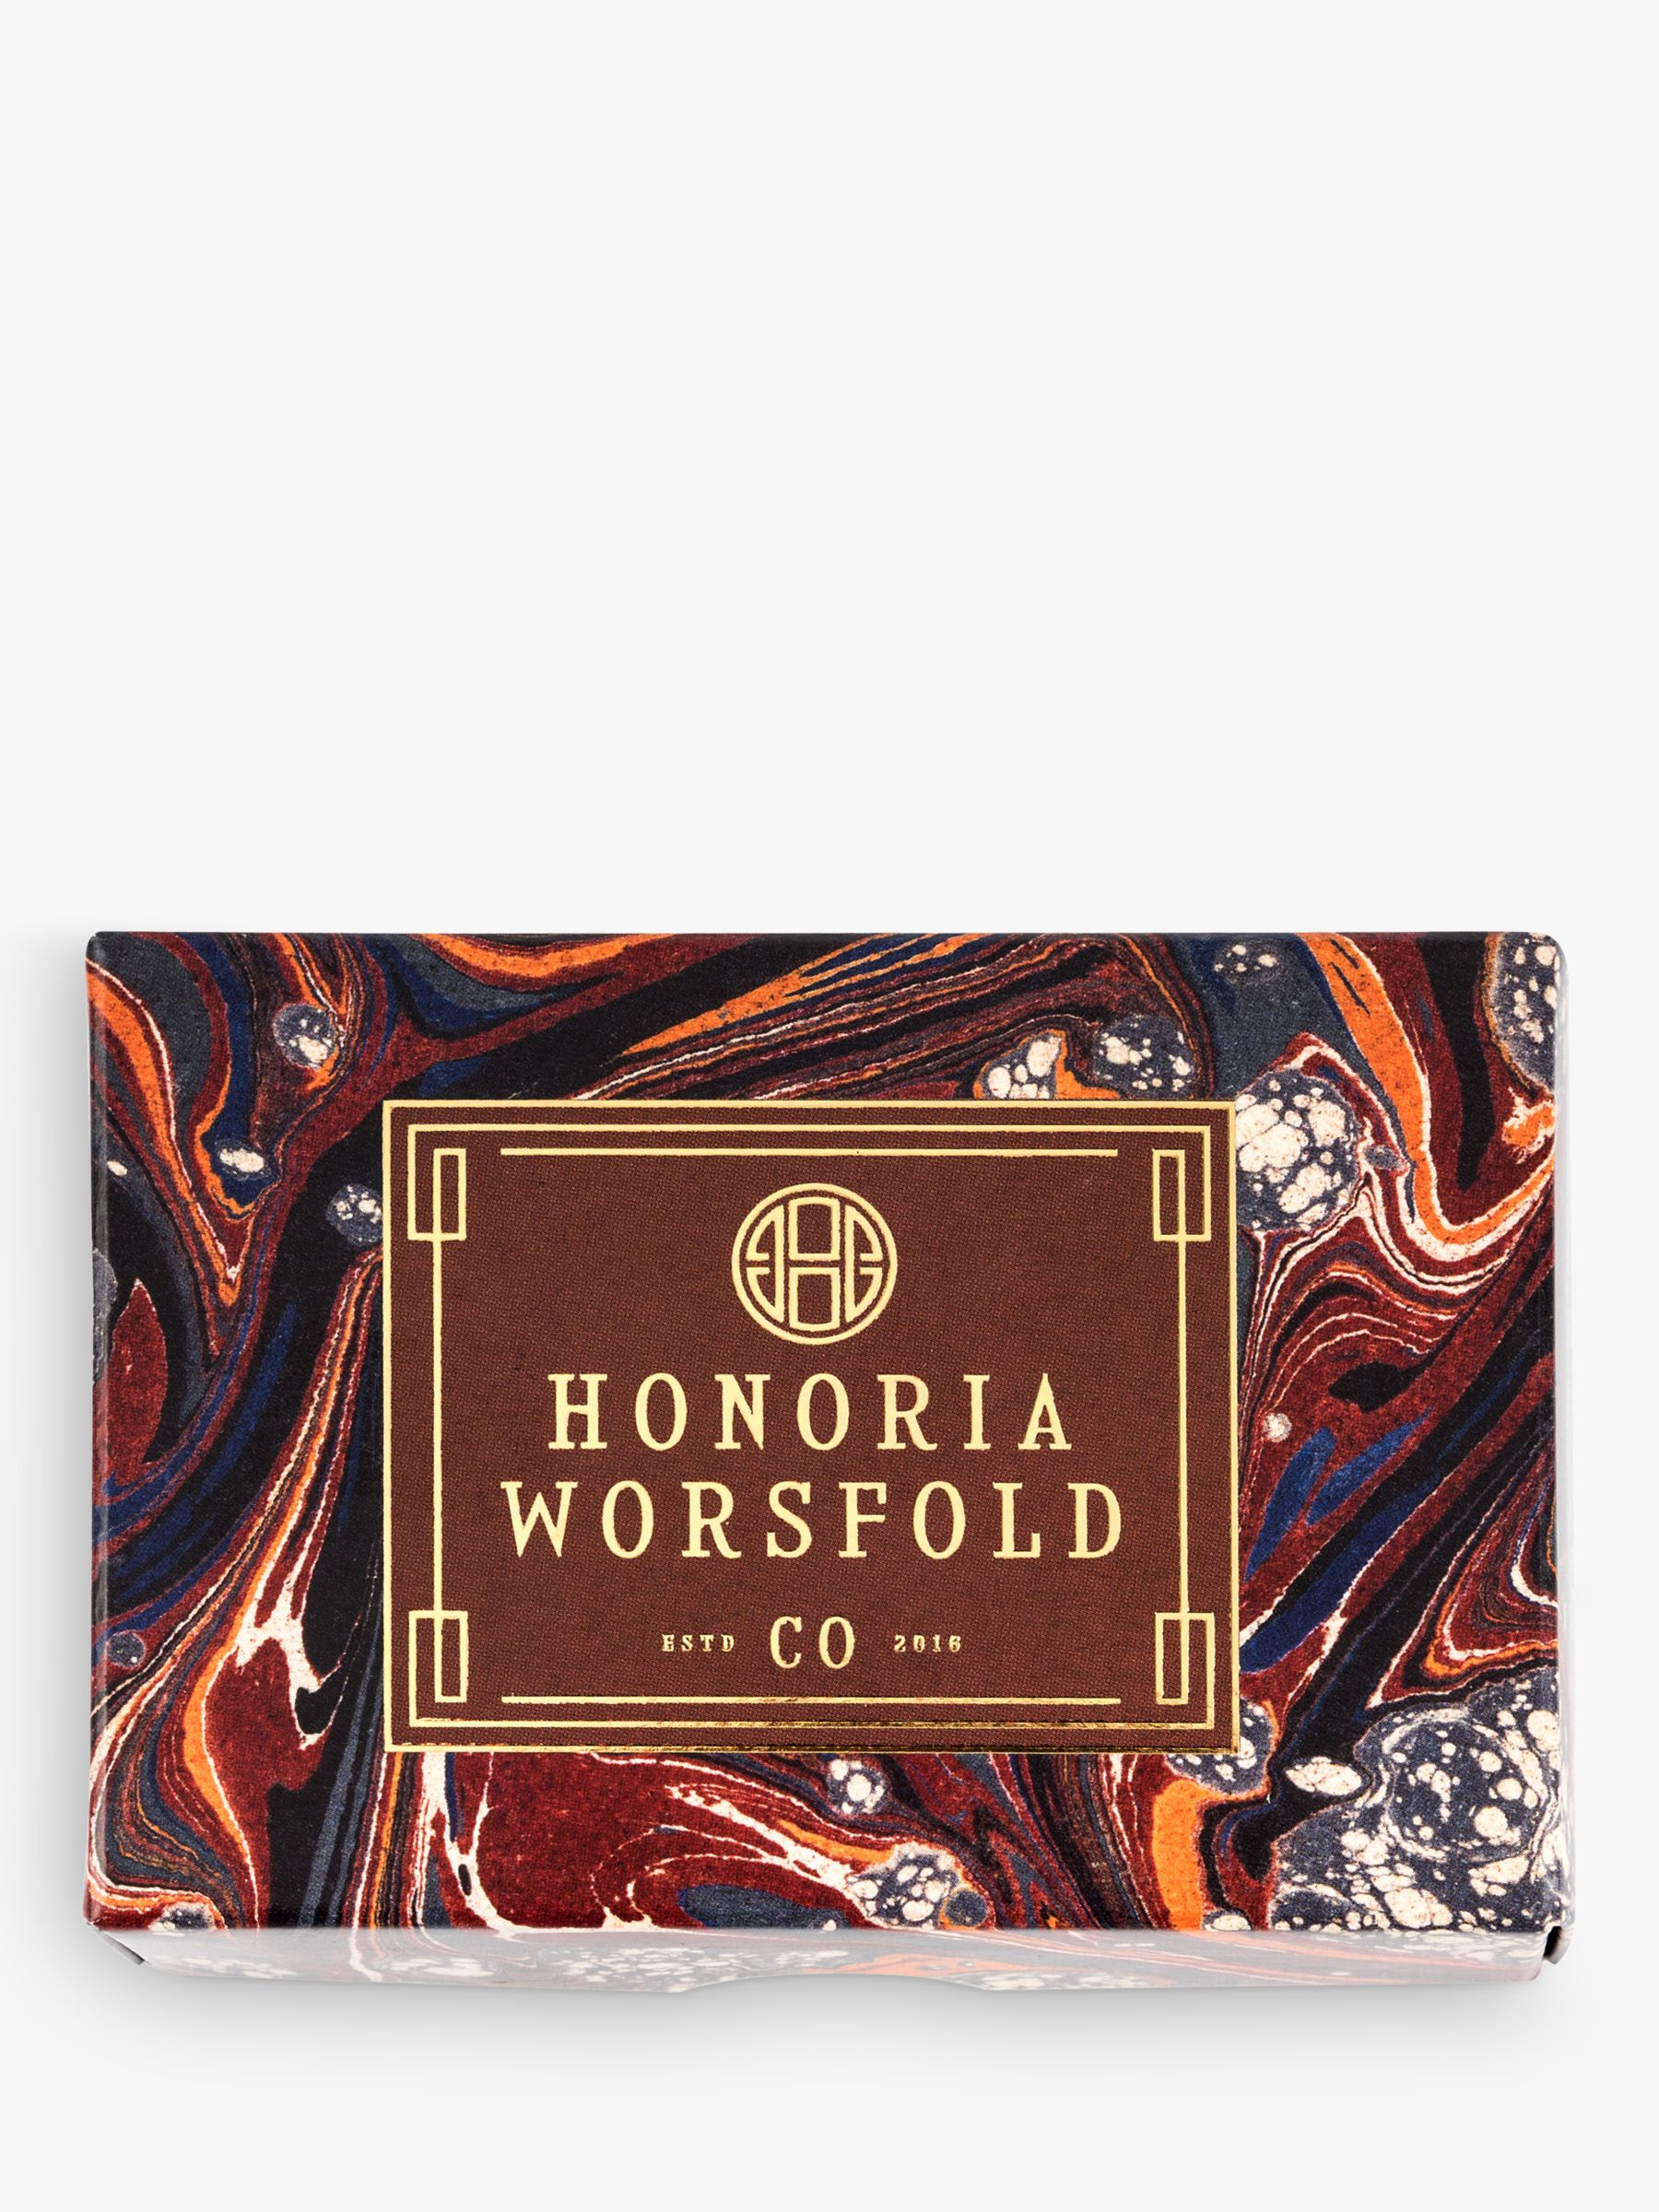 Honoria Worsfold Hector Hand & Body Soap Review